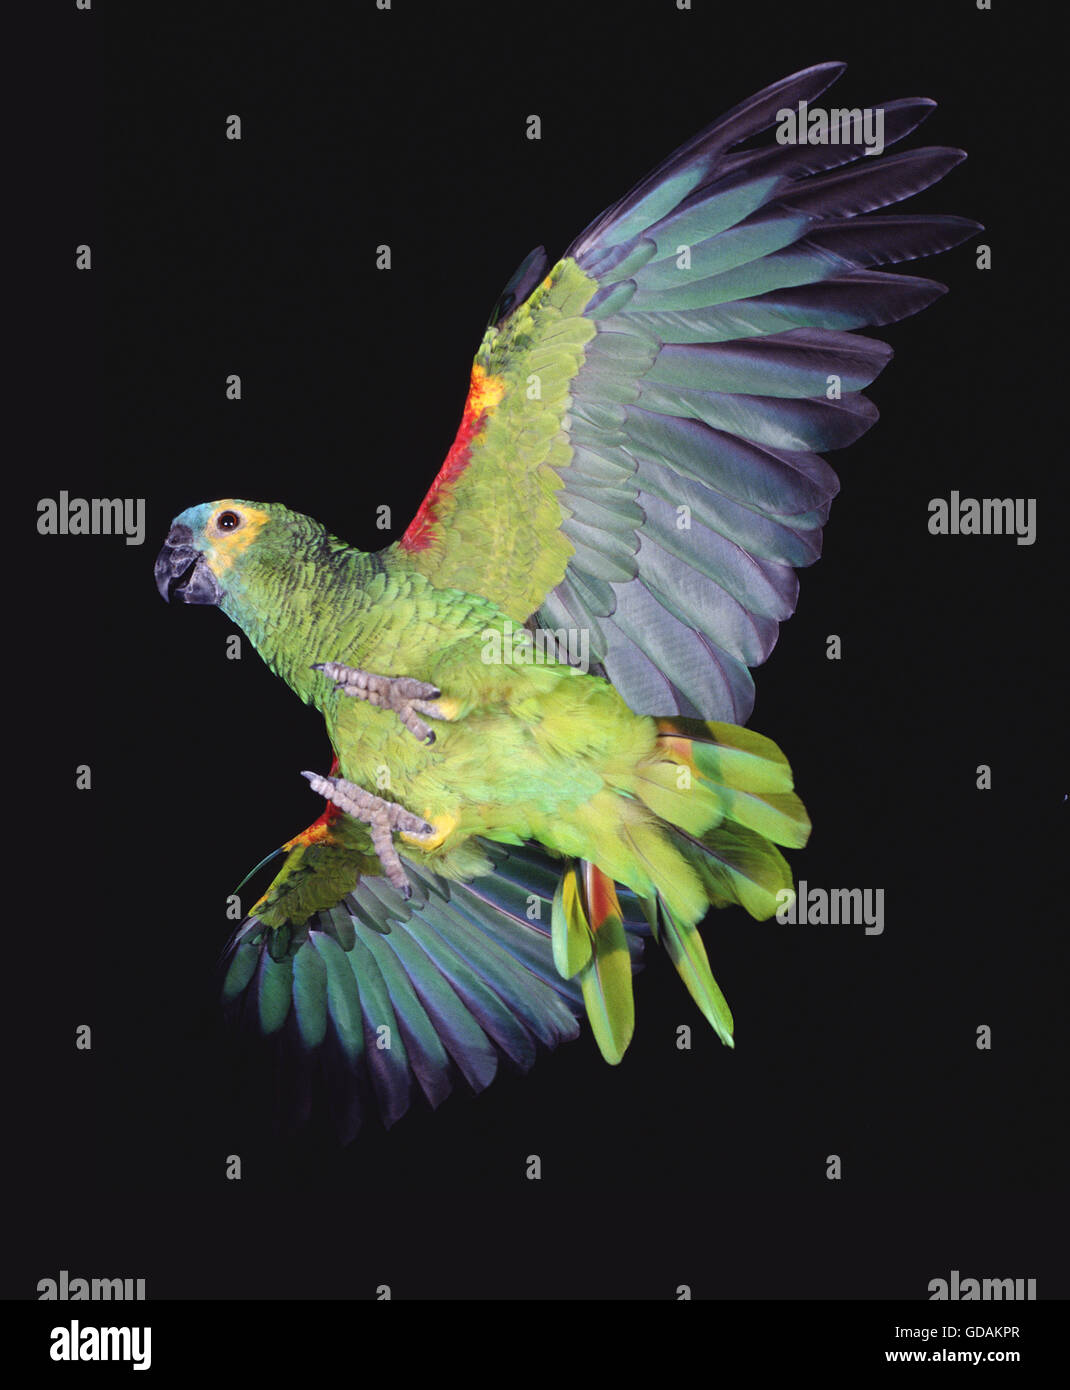 Blue-Fronted Amazon Parrot or Turquoise-Fronted Amazon, amazona aestiva, Adult in Flight against Black Background Stock Photo